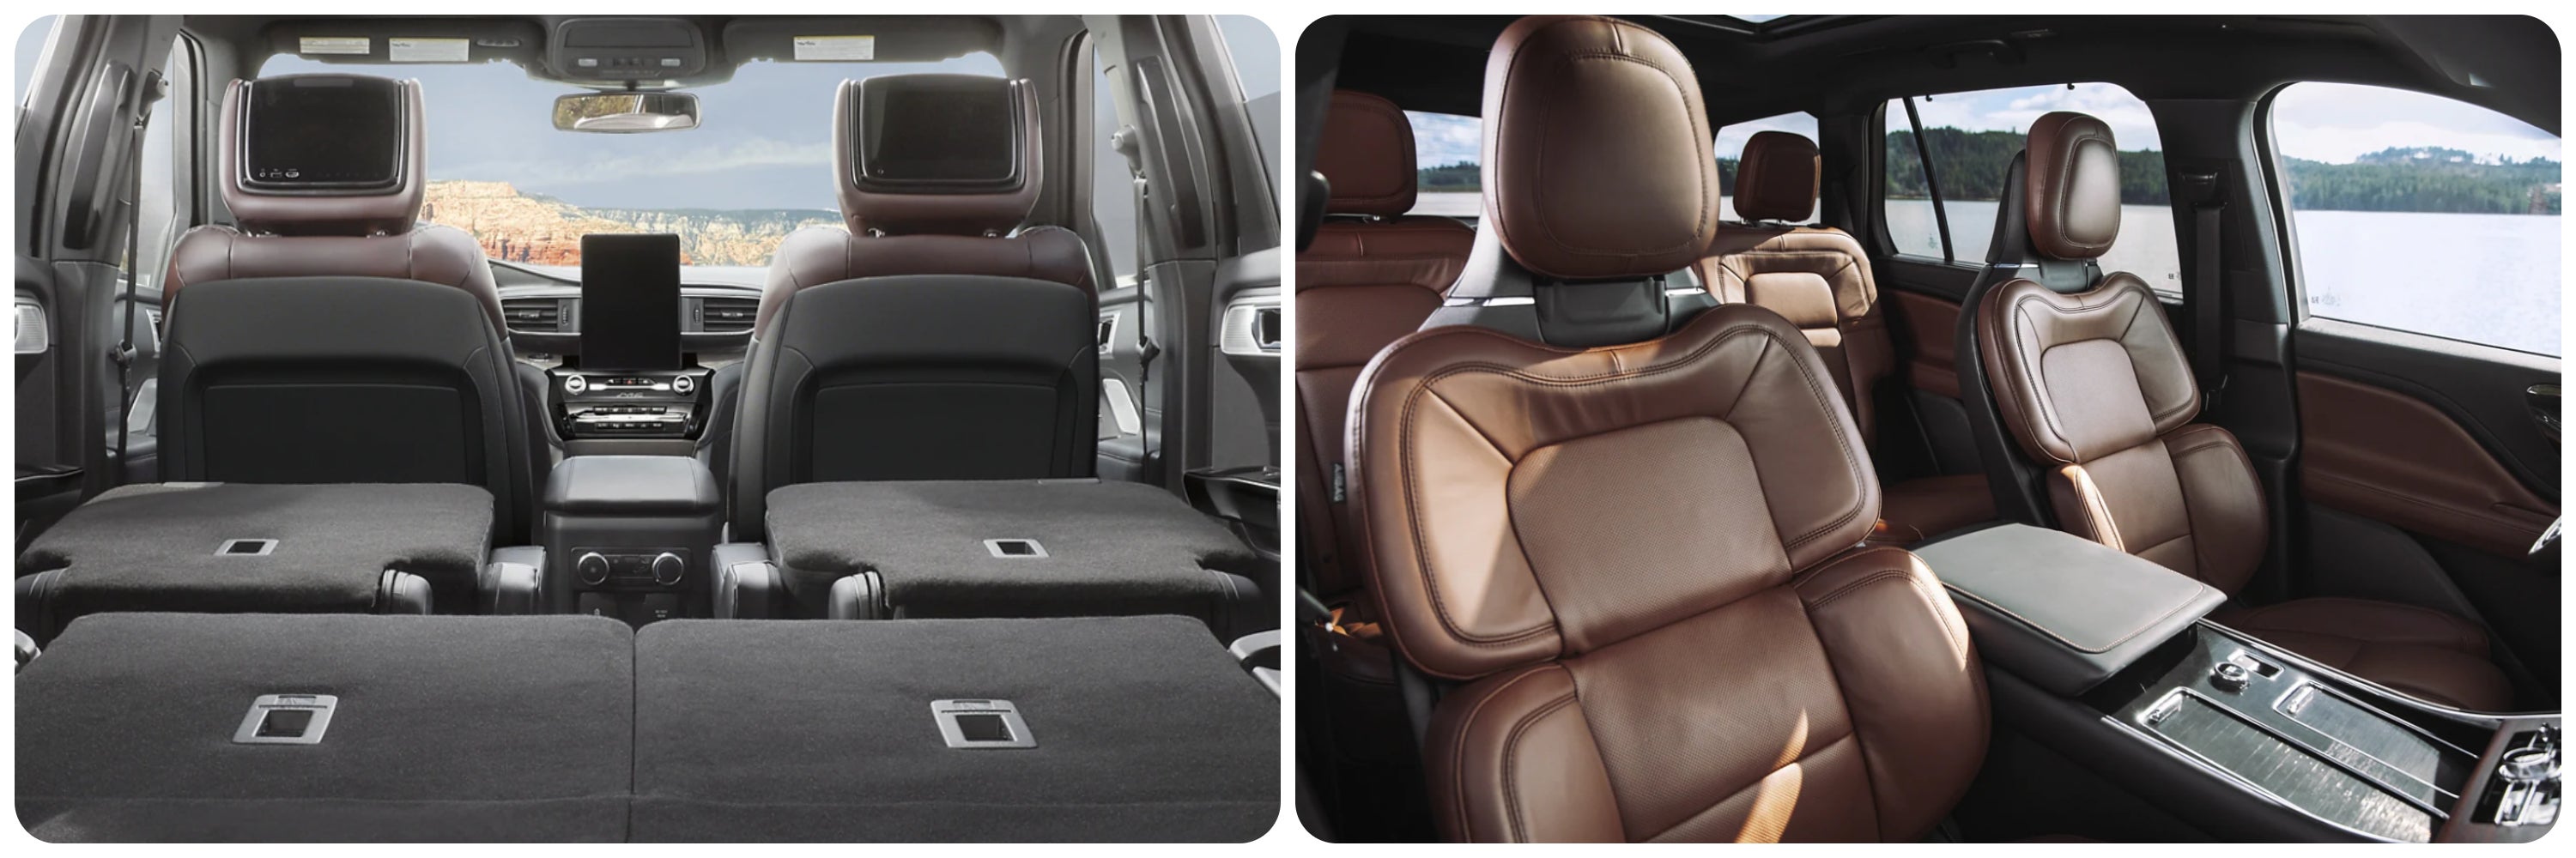 On the left a view of the interior of the 2023 Ford Explorer from the cargo hold, on the right a view of the seating of the 2023 Lincoln Aviator